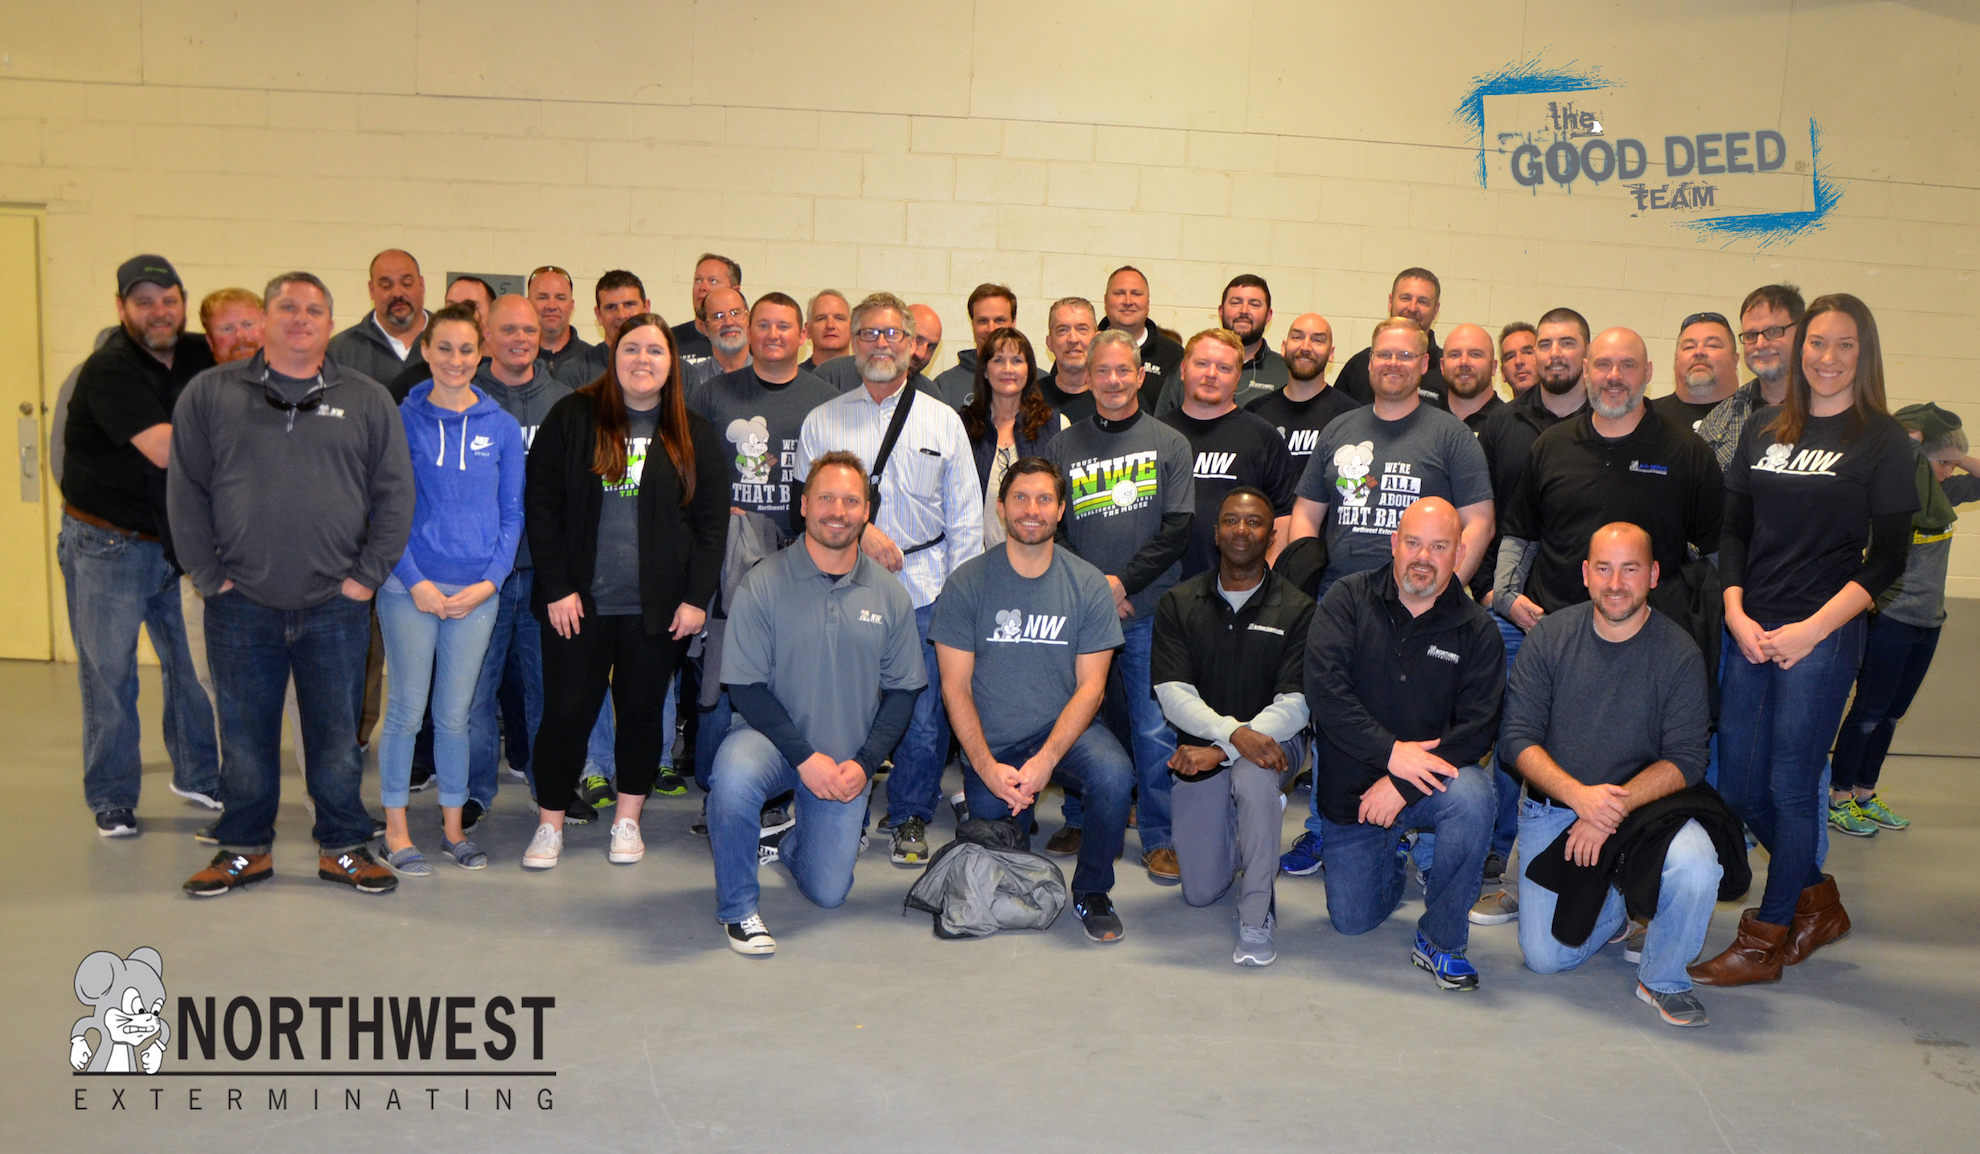 Northwest Exterminating’s Good Deed Team Participates in “From Hunger to Hope” Initiative with Feed My Starving Children in Gwinnett